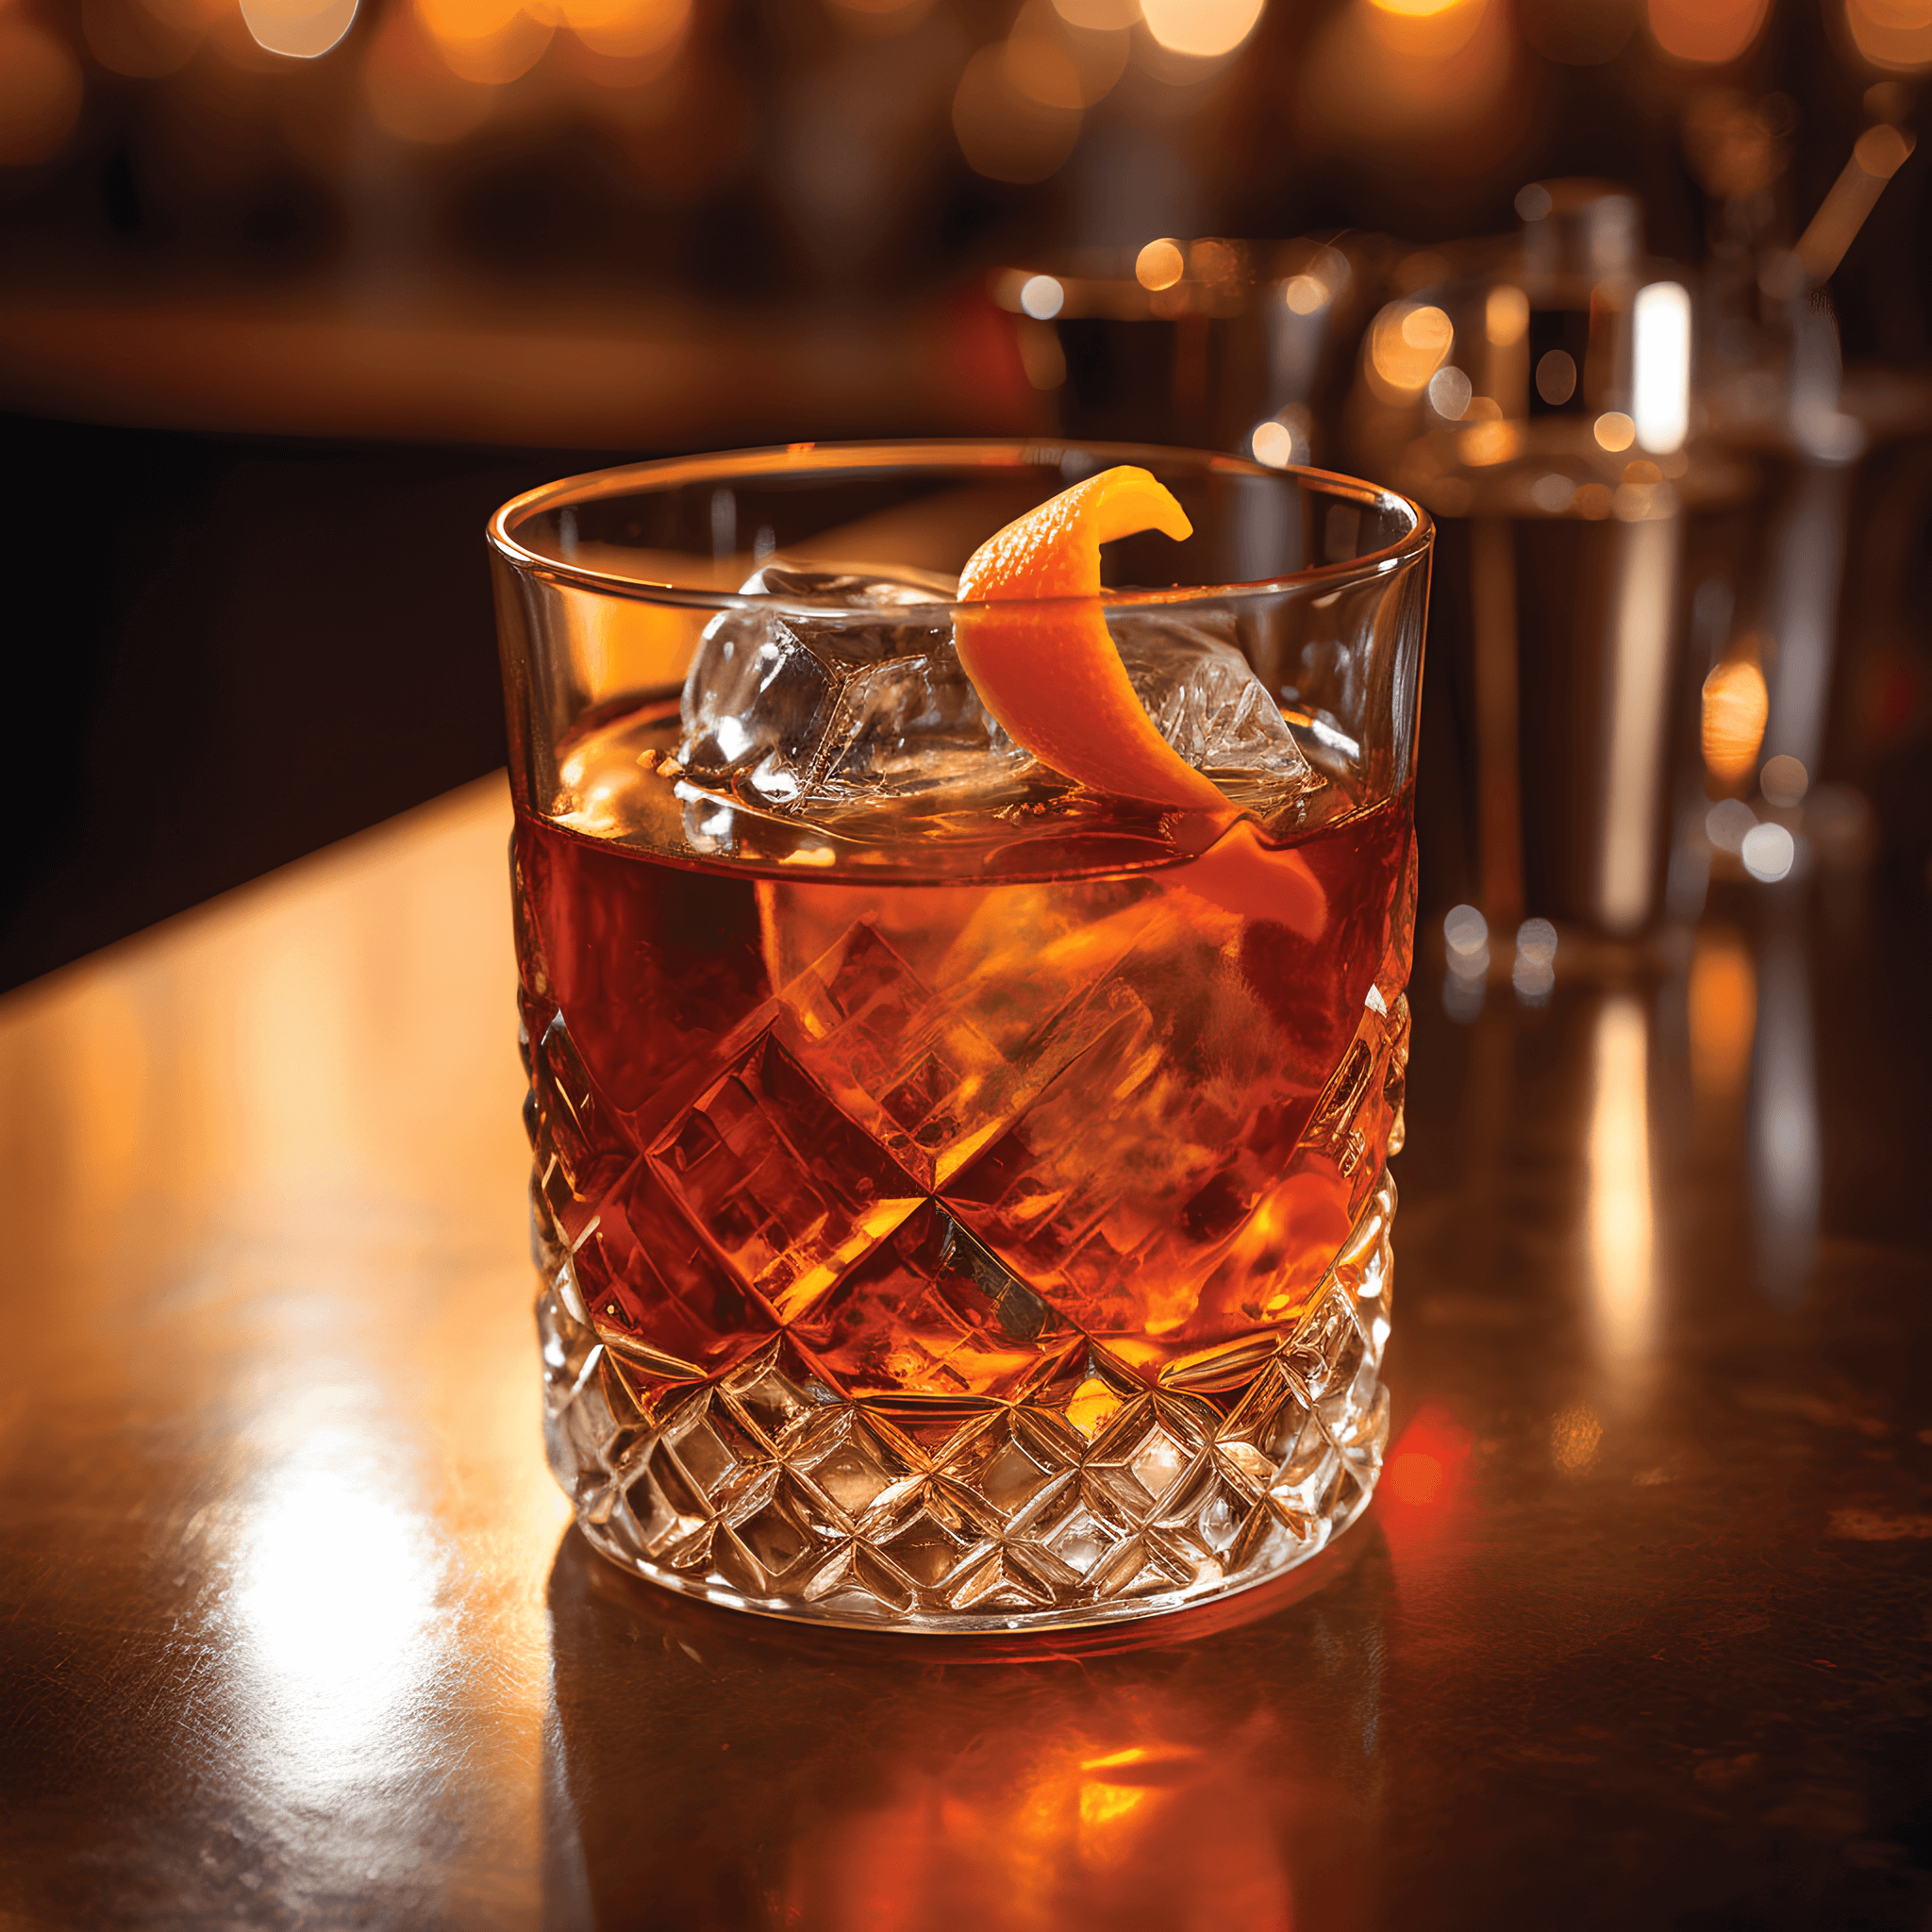 Best Autumn Drink: Try This Classic Old Fashioned - The Old Fashioned has a rich, complex taste that is both sweet and bitter. The whiskey provides a strong, warming base, while the sugar and bitters add a touch of sweetness and a hint of spice. The orange and cherry garnish add a subtle fruity note.